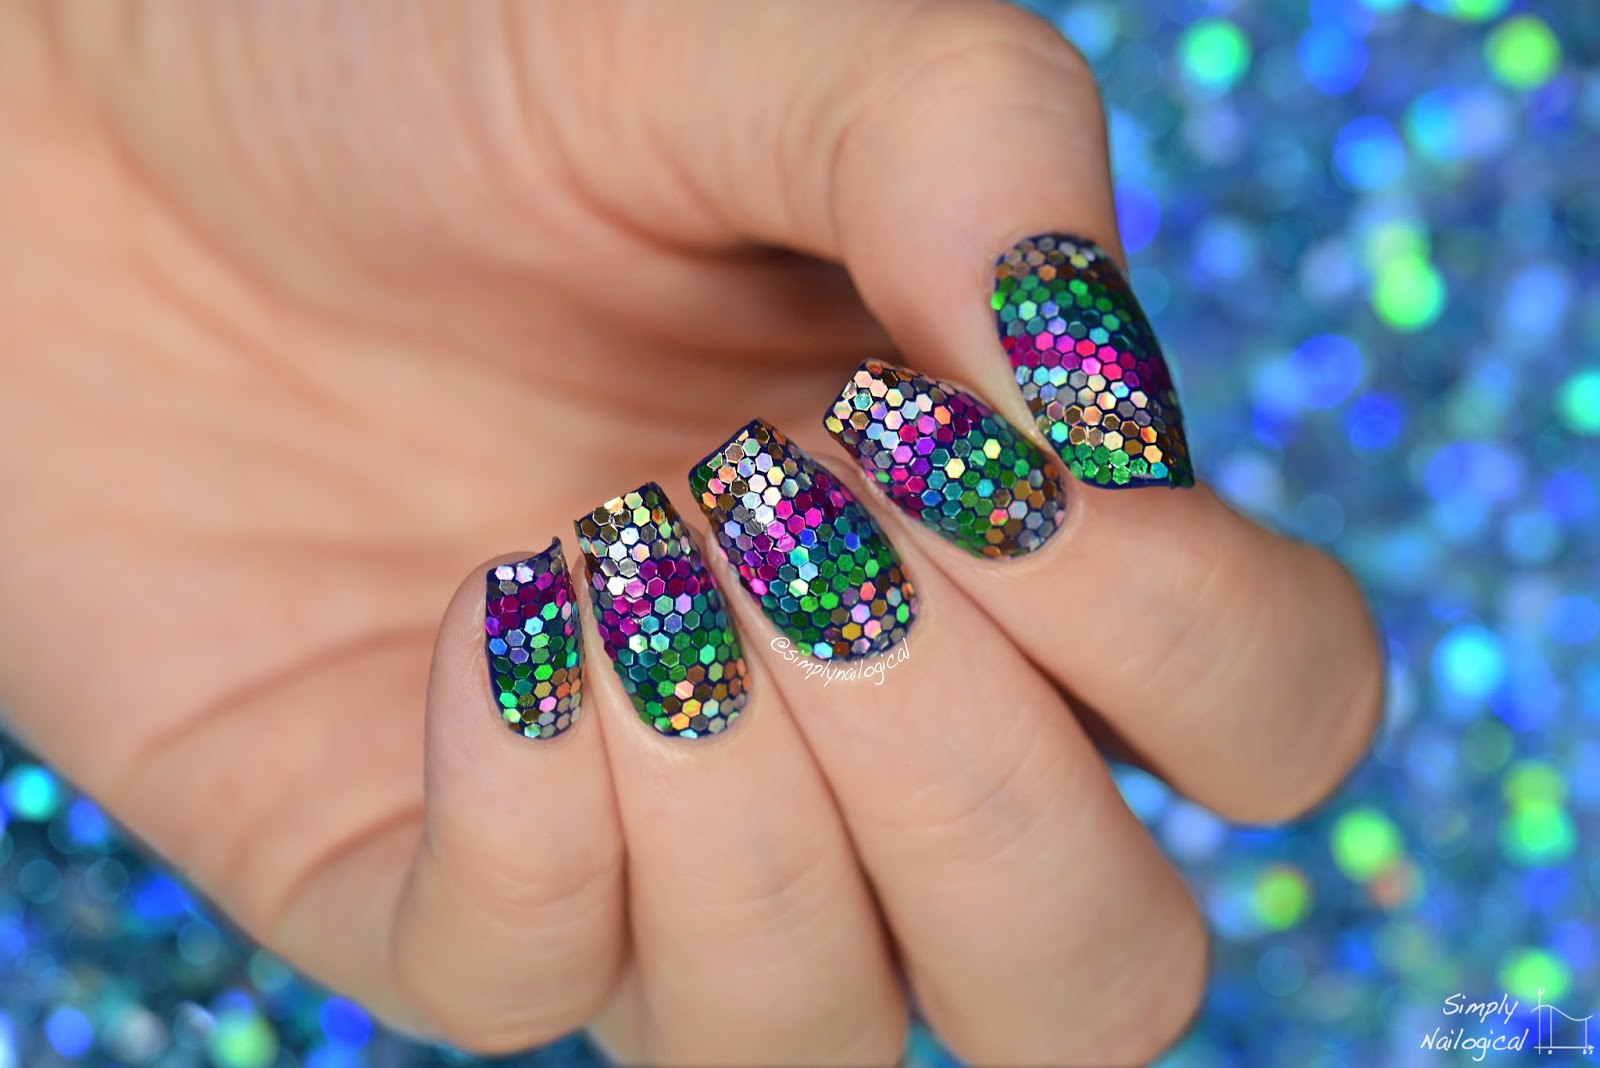 Simply Nailogical: 'V'-shaped loose glitter placement nails